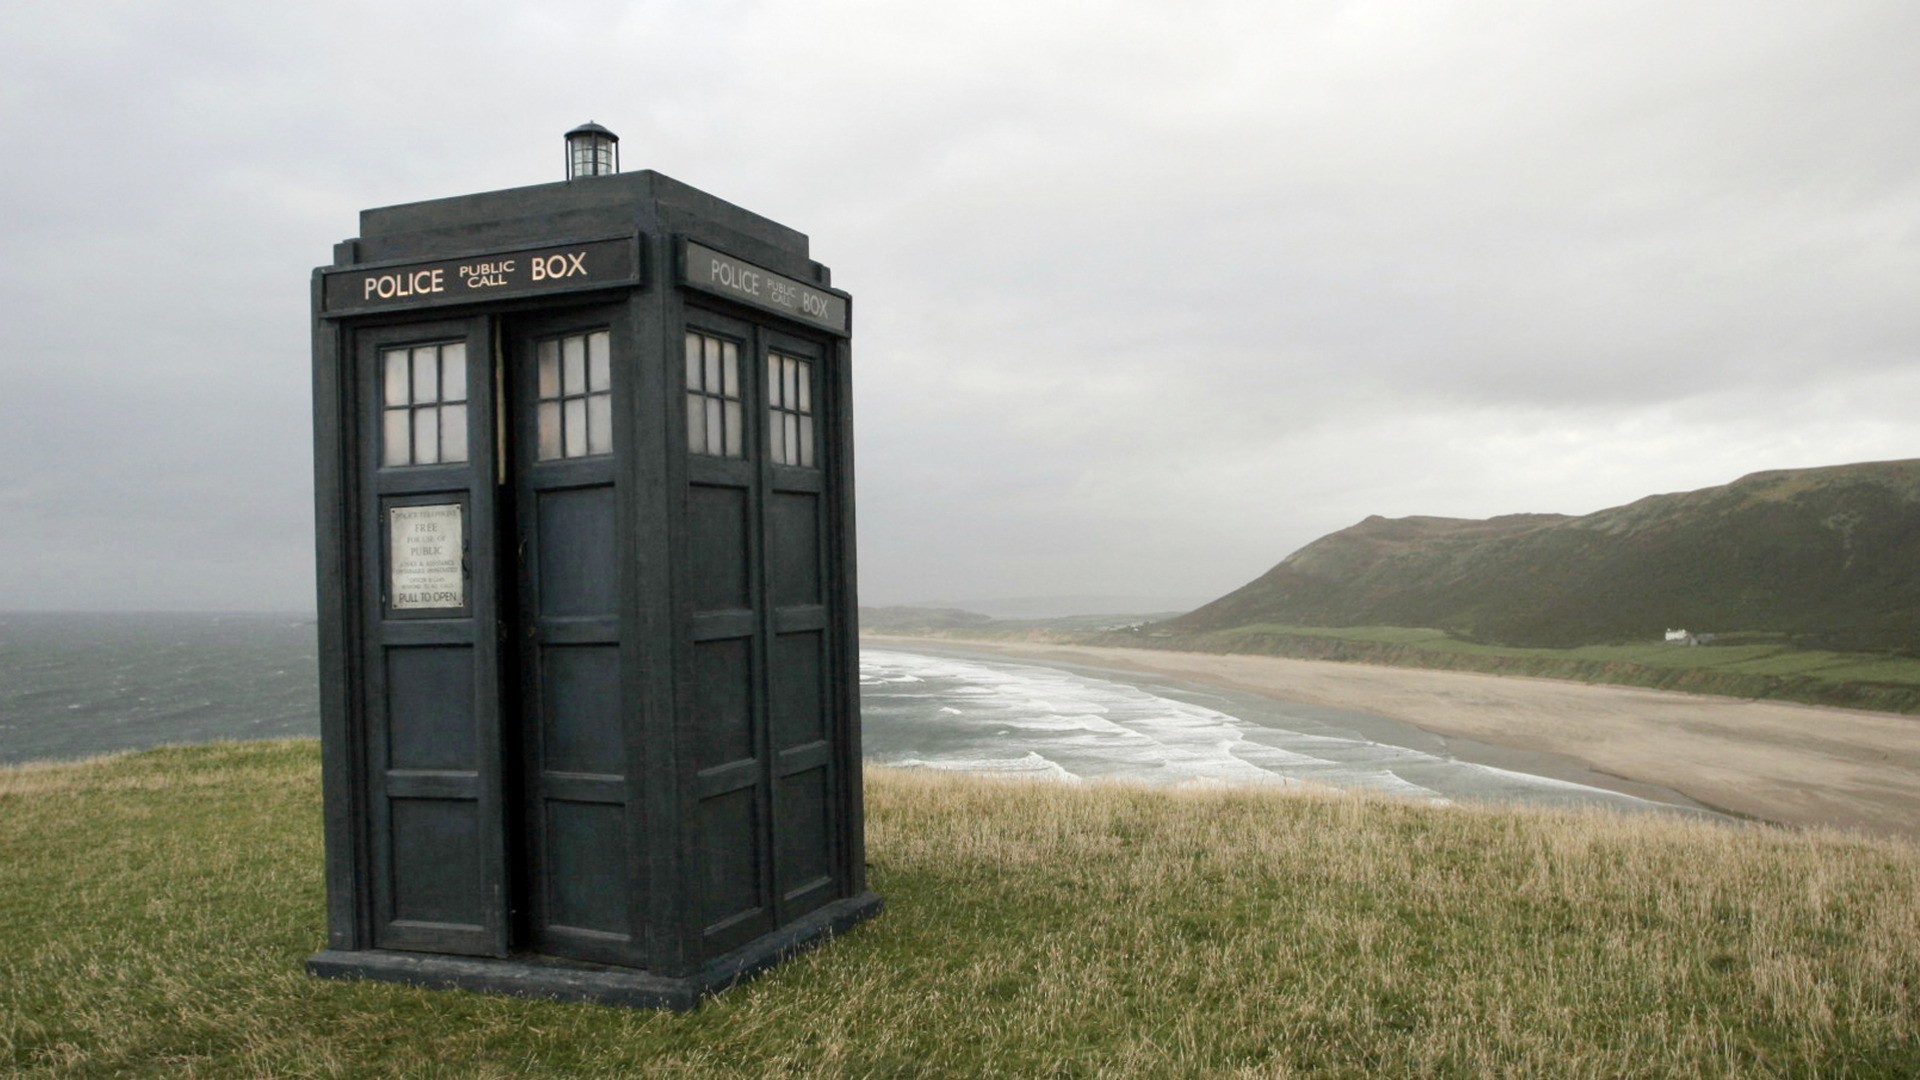 General 1920x1080 Doctor Who TARDIS sea TV series science fiction